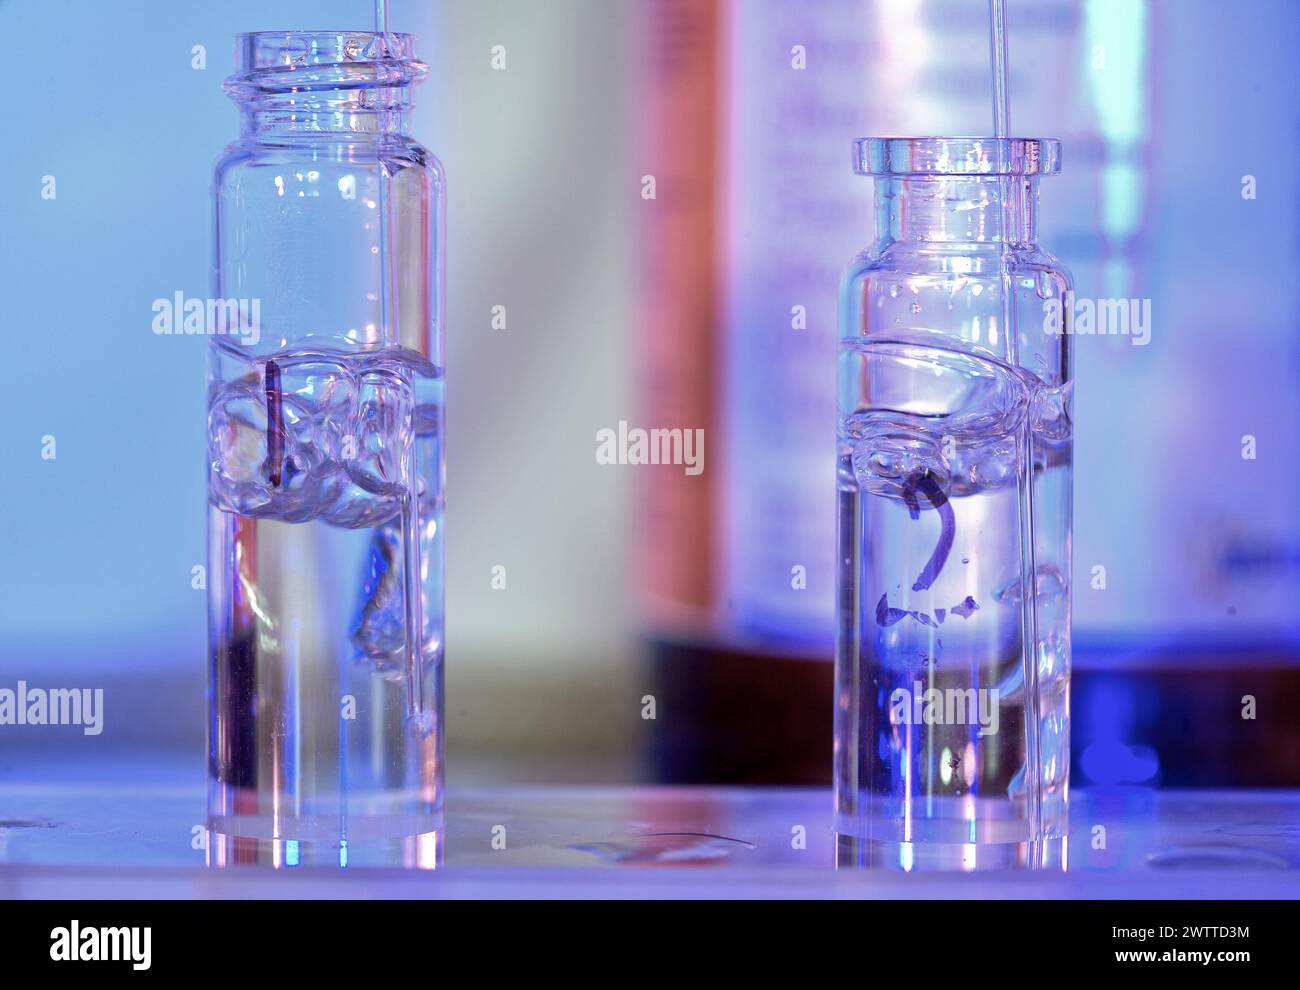 Two laboratory vials containing biological specimens in a blue-lit scientific setting Stock Photo